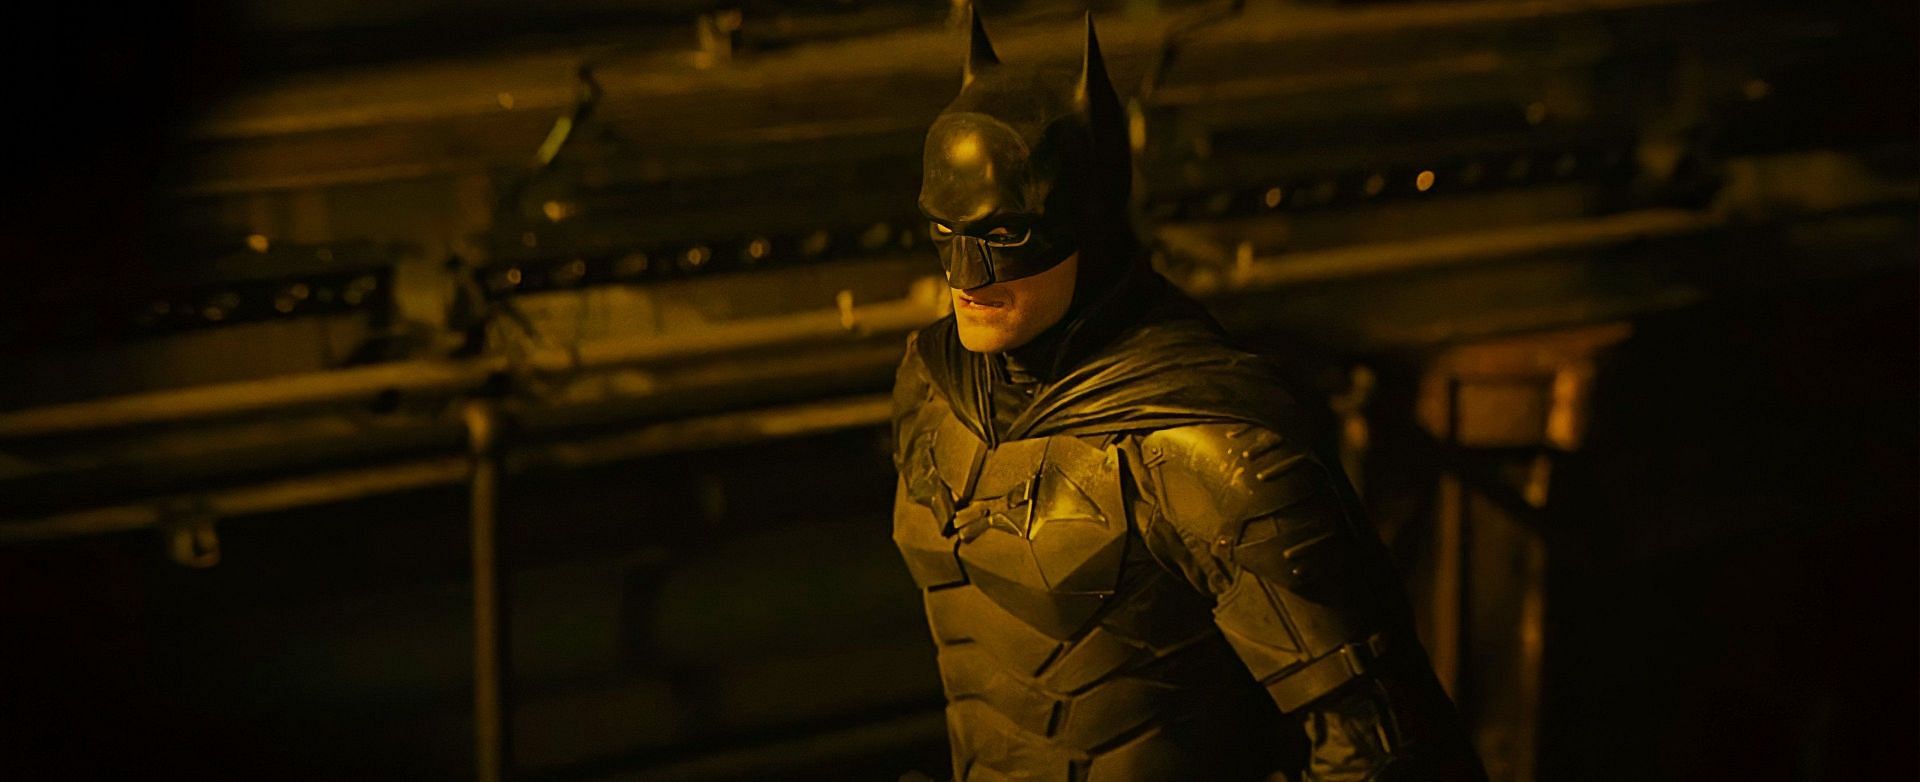 The Batman 2 and Batman: The Brave and the Bold: two unique takes on the Dark Knight (Image via Warner Bros)